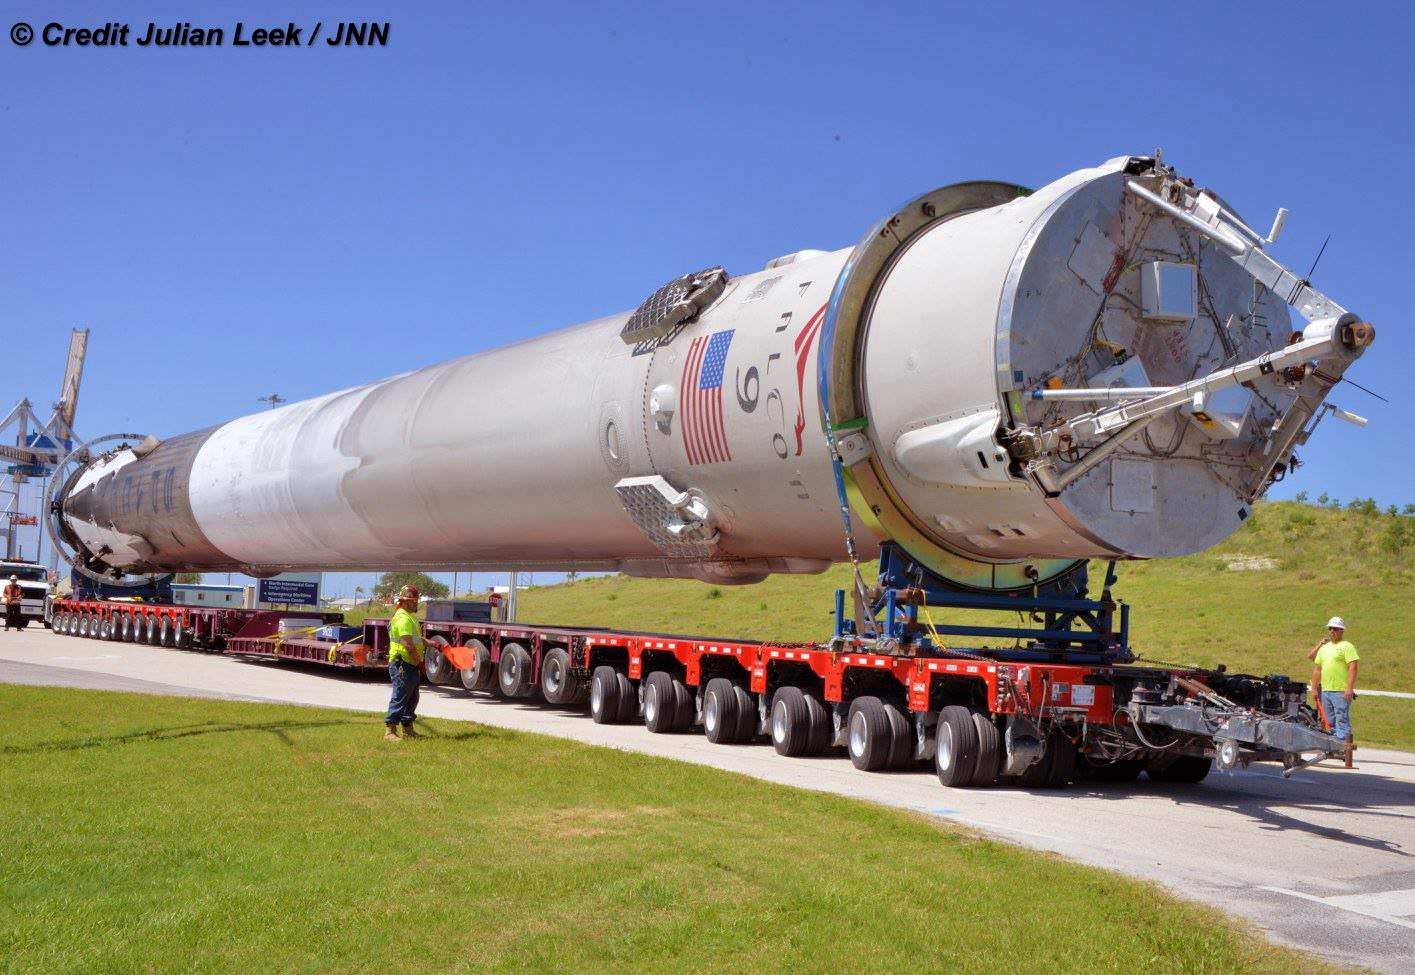 Recovered SpaceX Falcon 9 first stage rocket was transported horizontally back to SpaceX processing hanger at the Kennedy Space Center from Port Canaveral, Florida storage and processing facility on April 19, 2016. Credit: Julian Leek